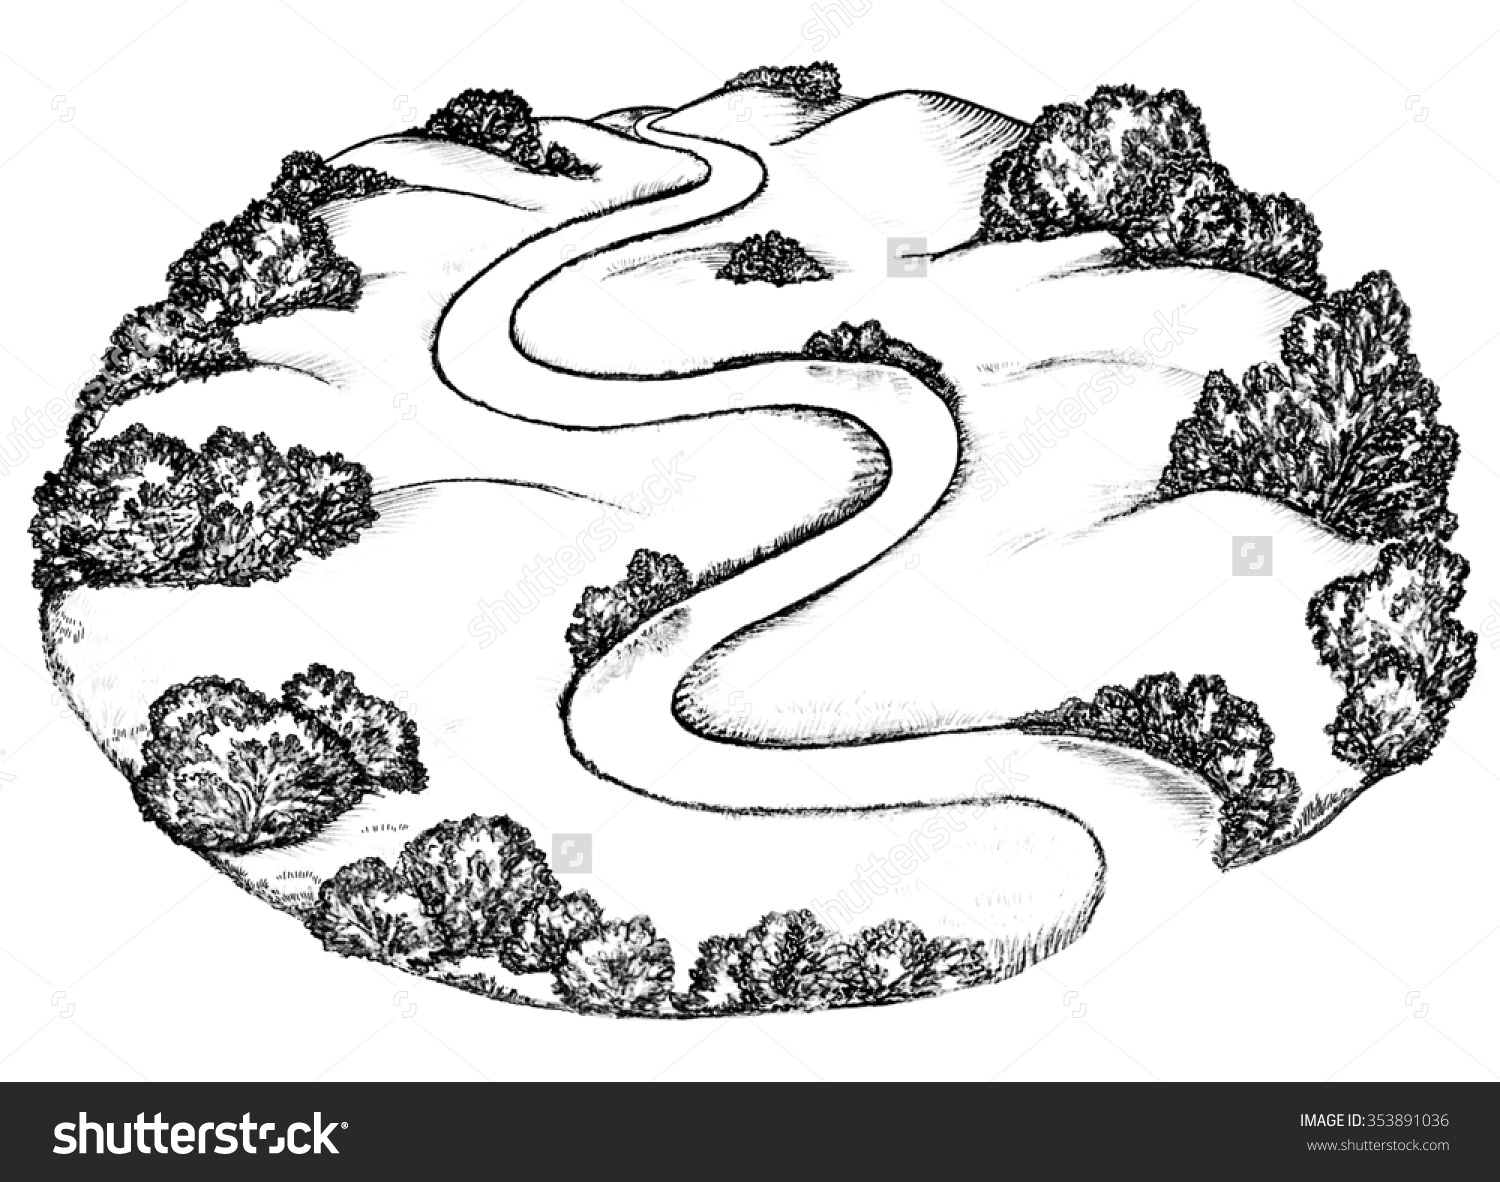 River Clipart Black And White. 